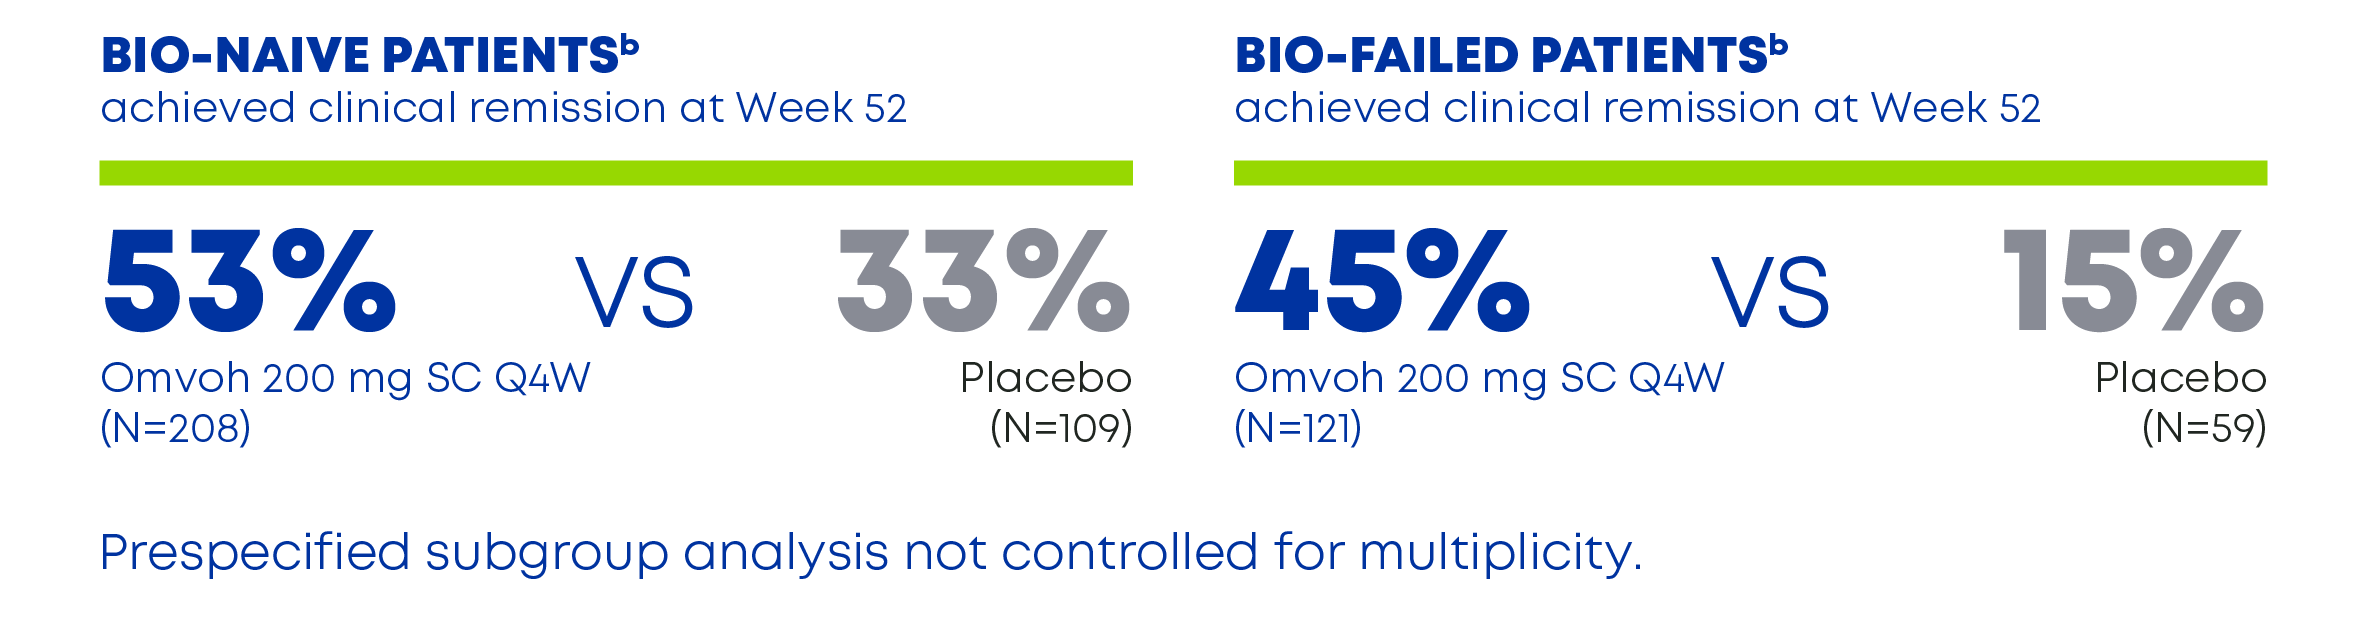 Bio-naive and Bio-failed Patients Achieved Clinical Remission at Week 52.